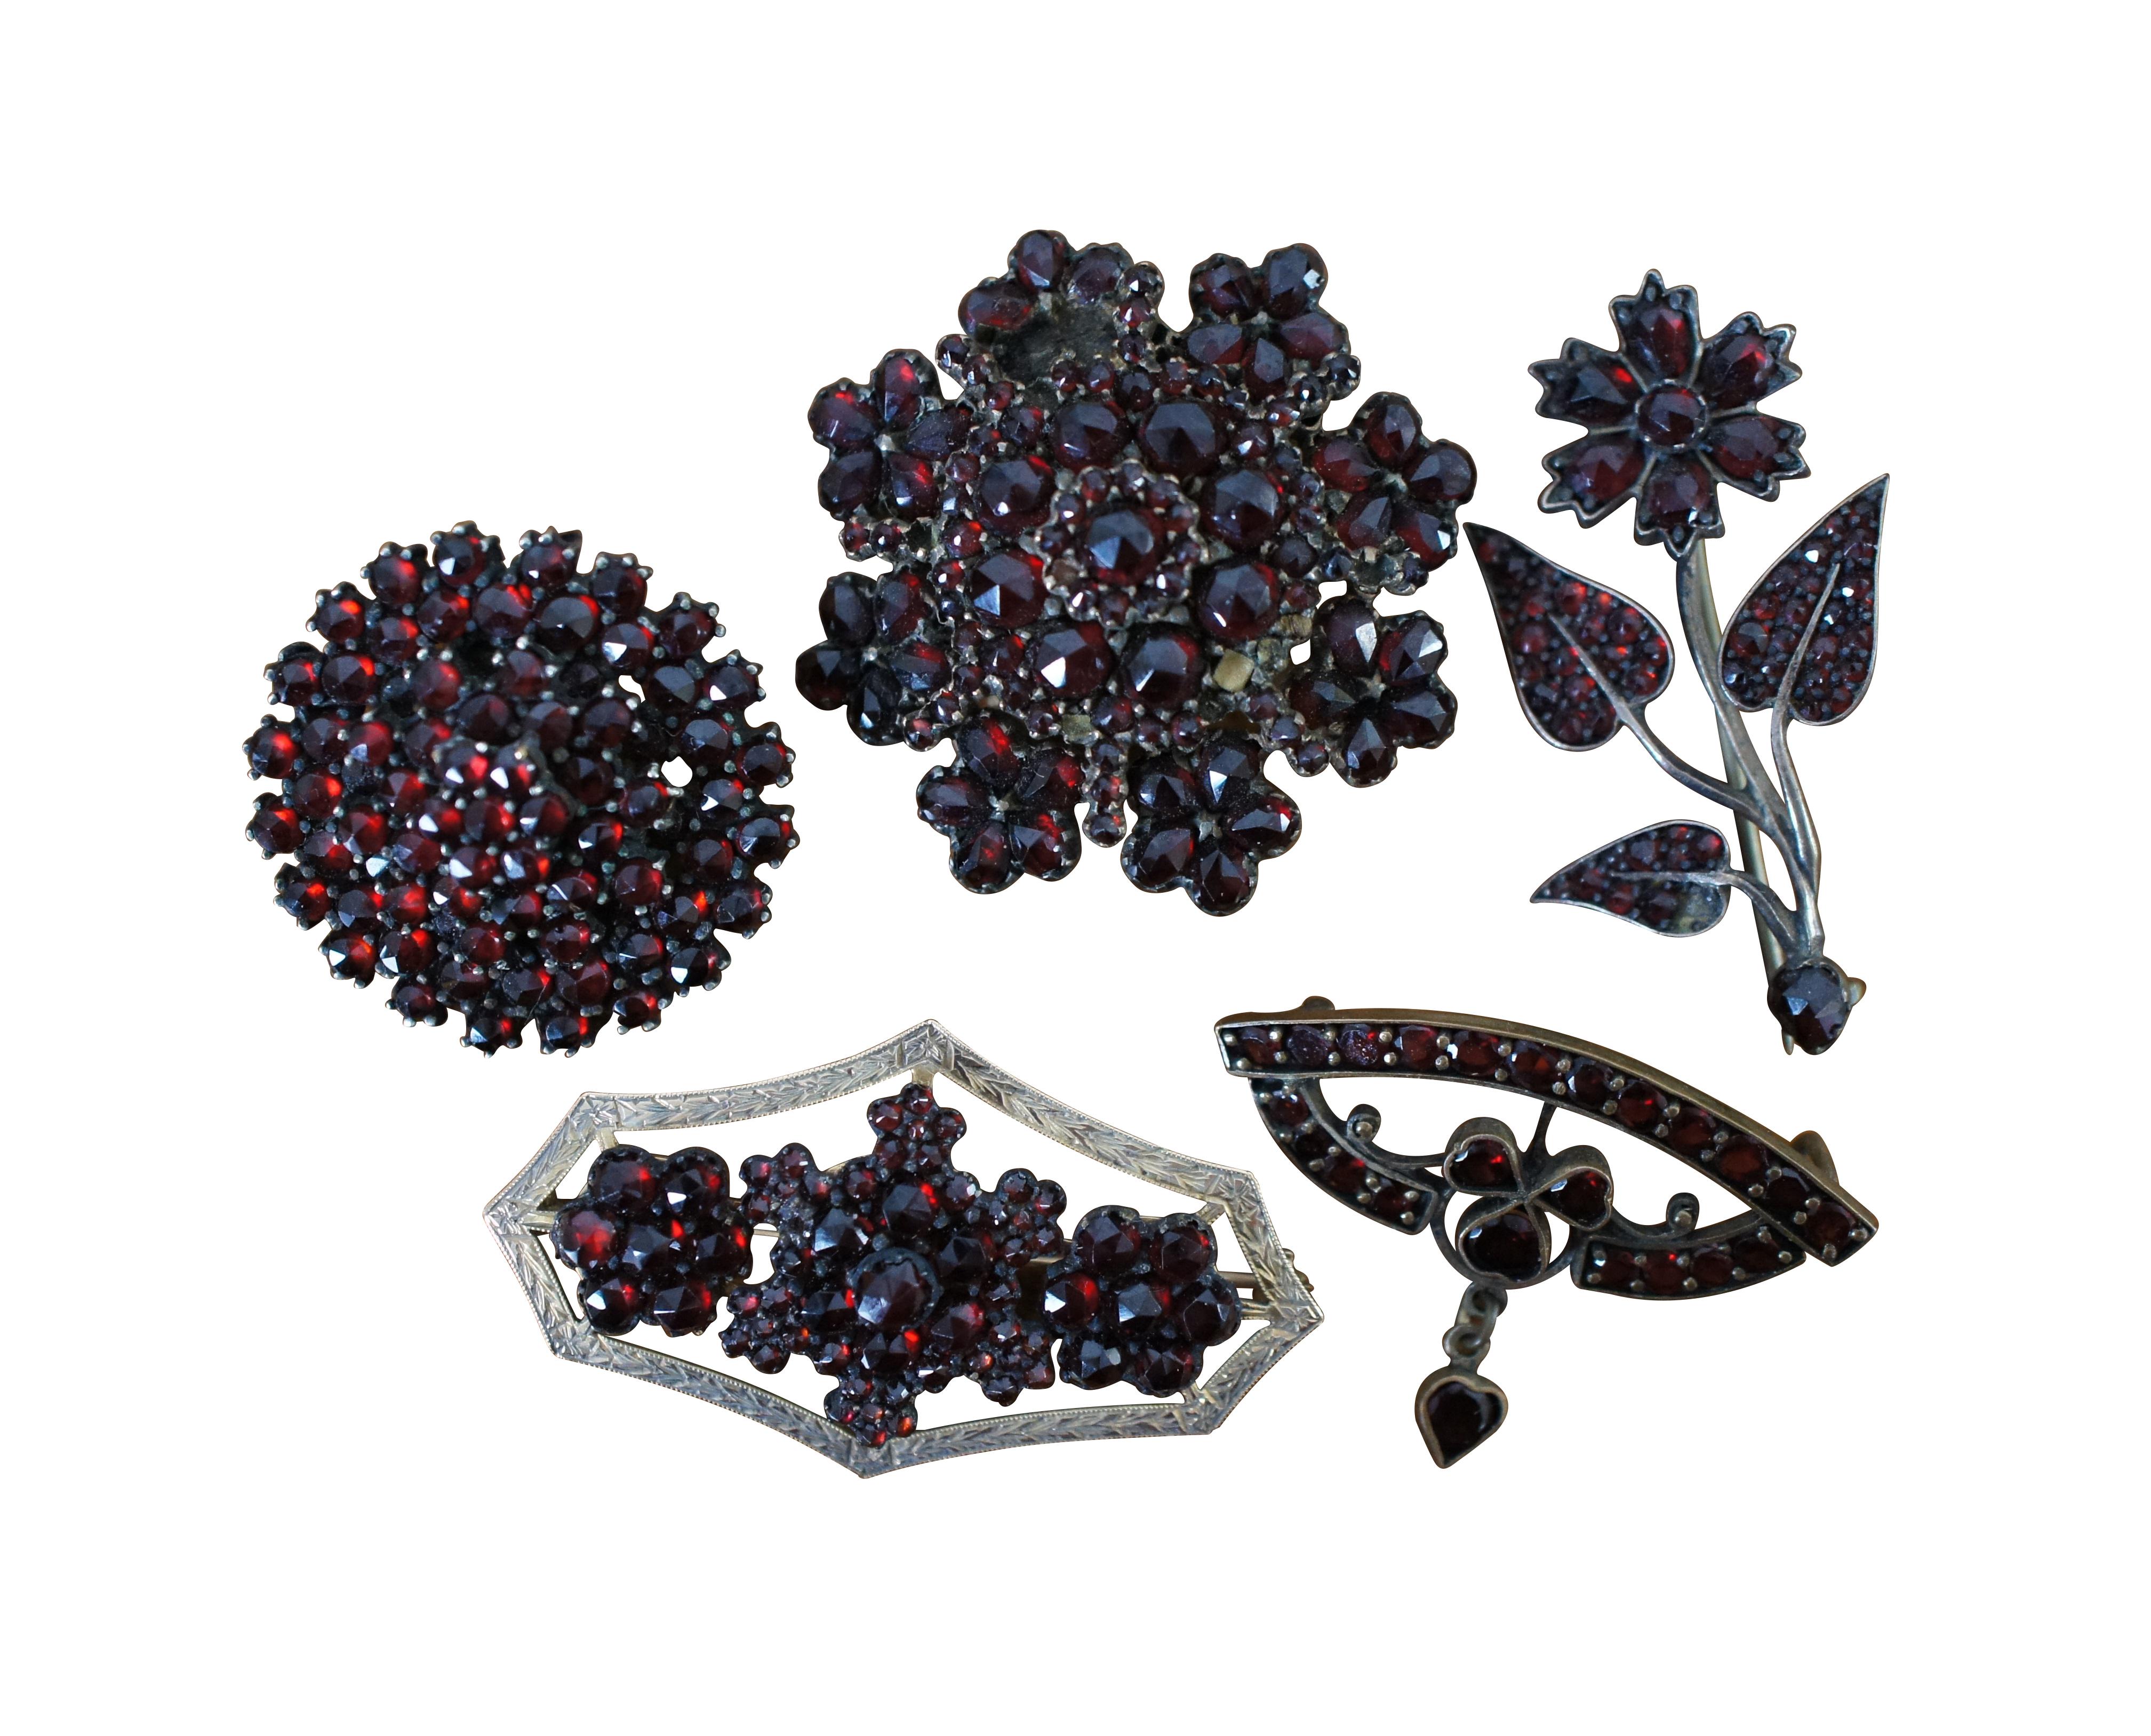 Antique and vintage lot of red Garnet jewelry featuring pins / brooches / pendants / bracelet and earrings.  Earrings and bracelet 800 silver.  Scalloped Diamond shape pin 10K gold.  

Dimensions:
Largest Piece (Bracelet) - 6” x 0.125” x 0.375” /